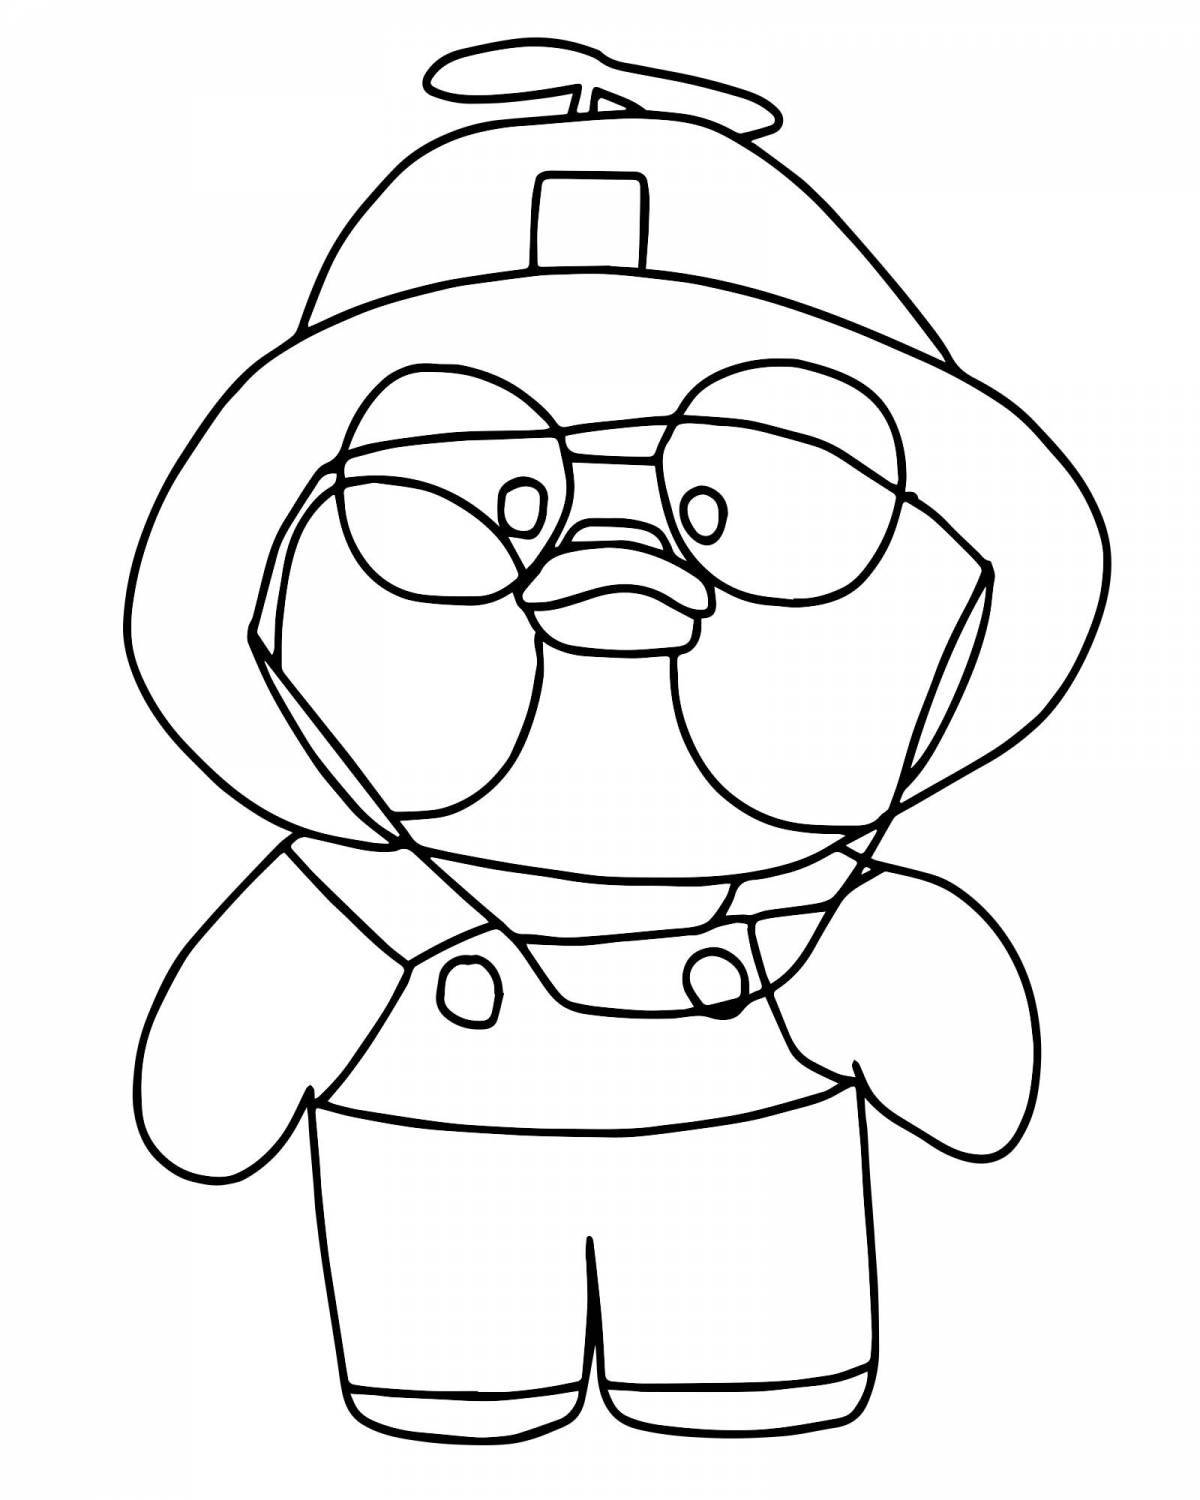 Lalafan crazy duck coloring page